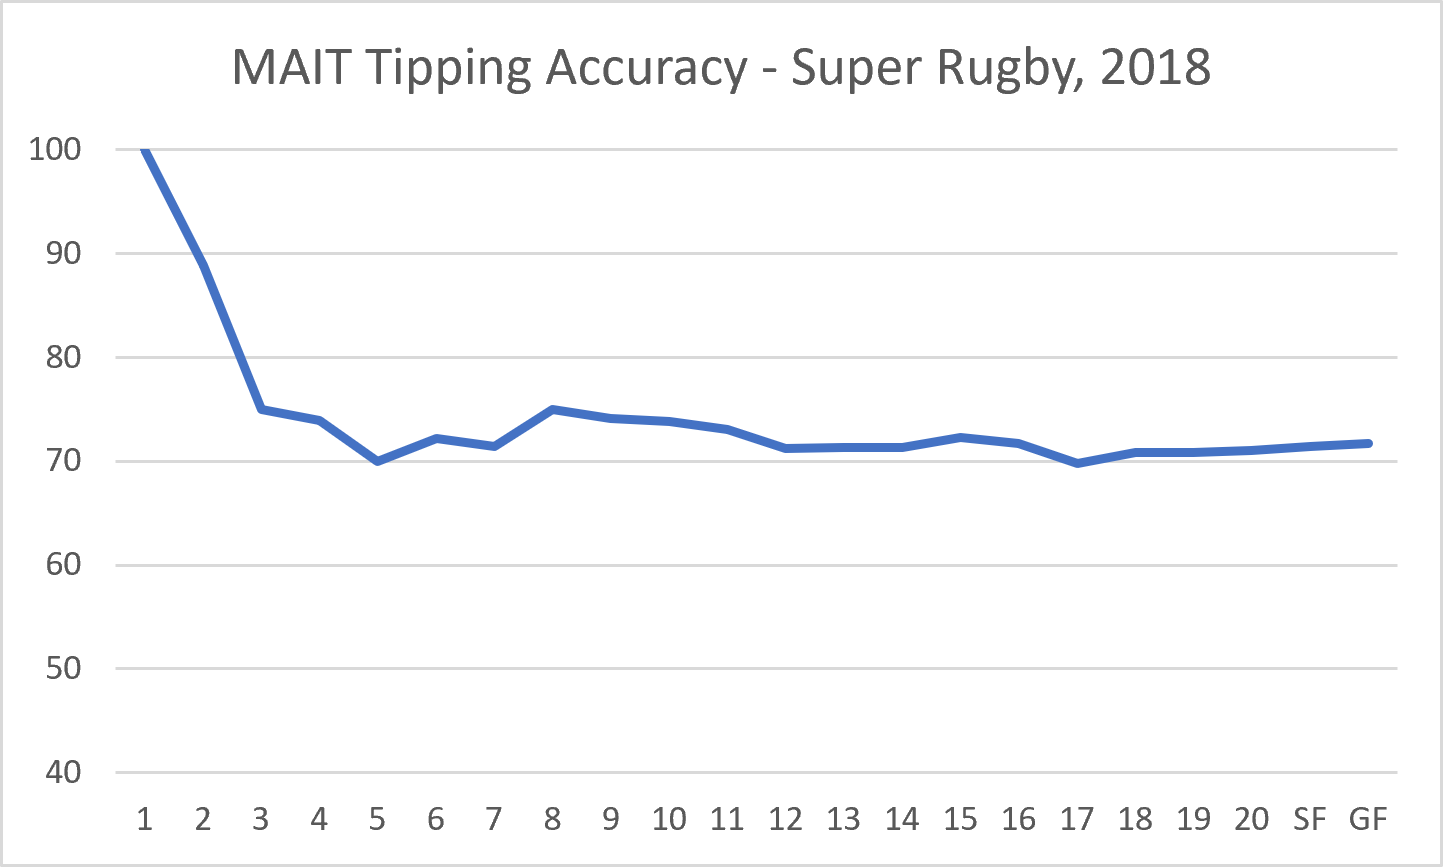 Performance of Super Rugby predictions for the 2018 season